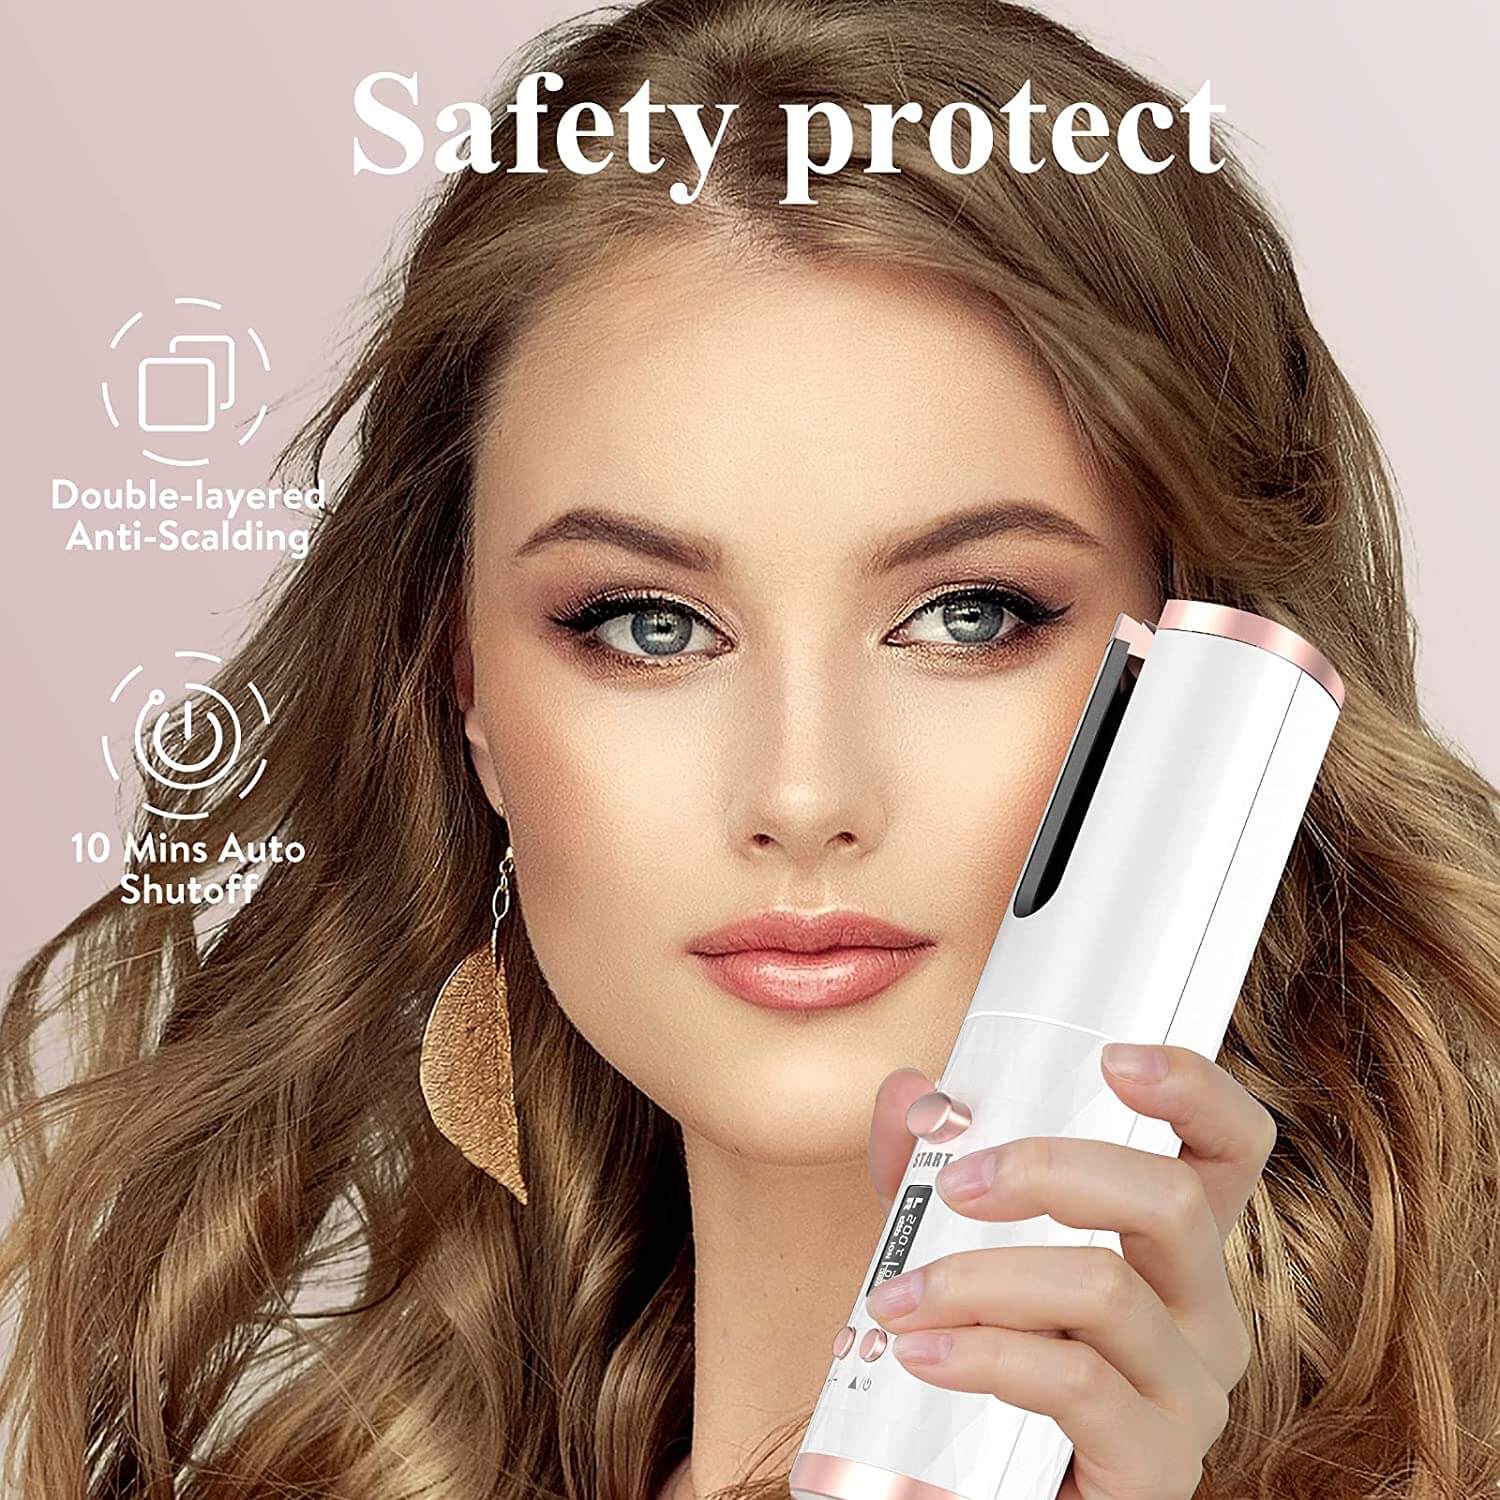 Cordless Automatic Hair Curler - The Shopsite